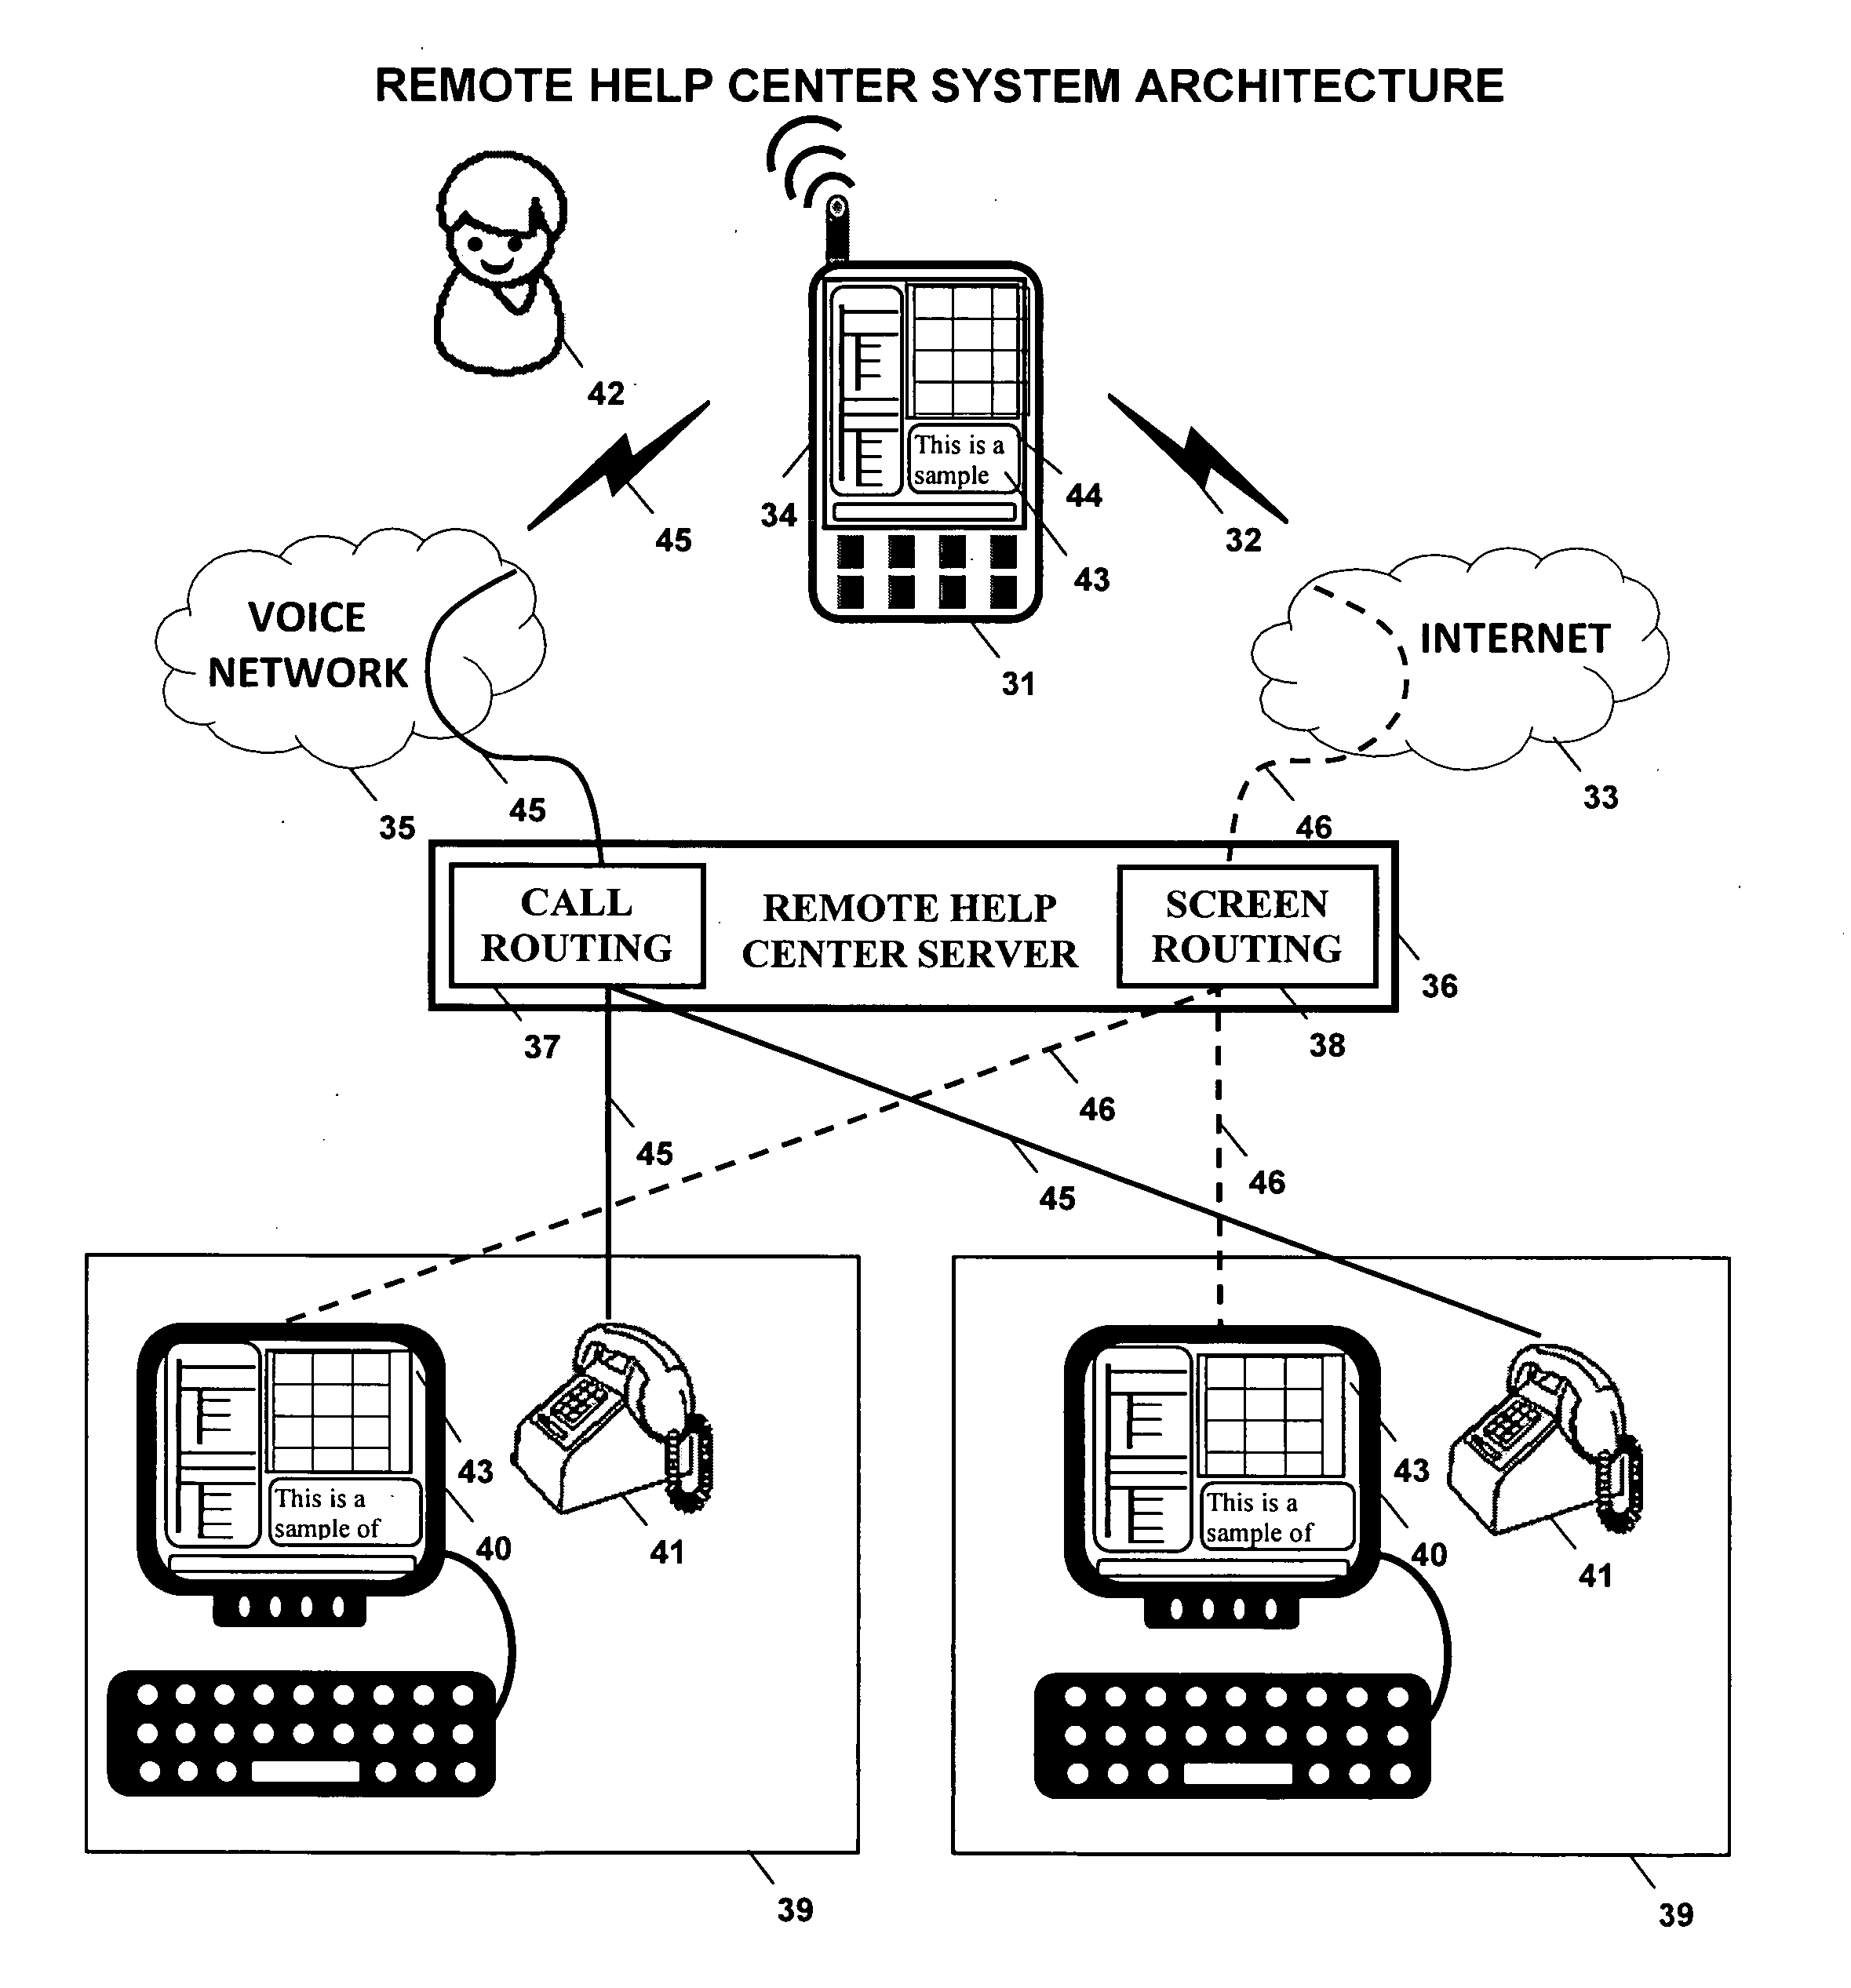 Assisted application operation service for mobile devices using screen sharing